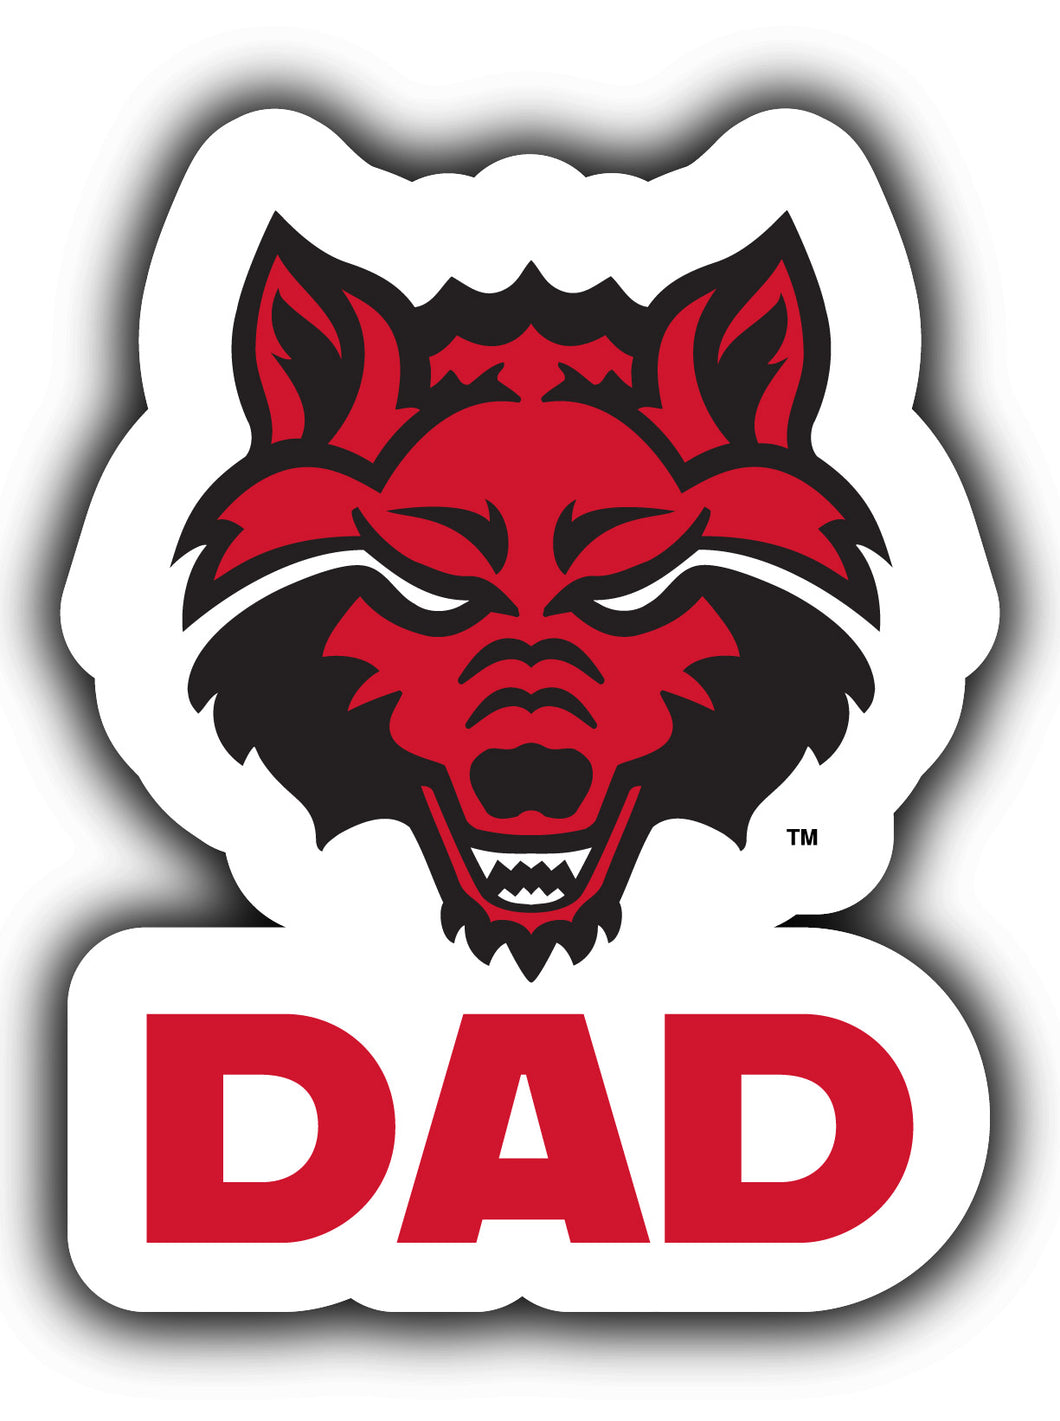 Arkansas State 4-Inch Proud Dad NCAA - Durable School Spirit Vinyl Decal Perfect Gift for Dad